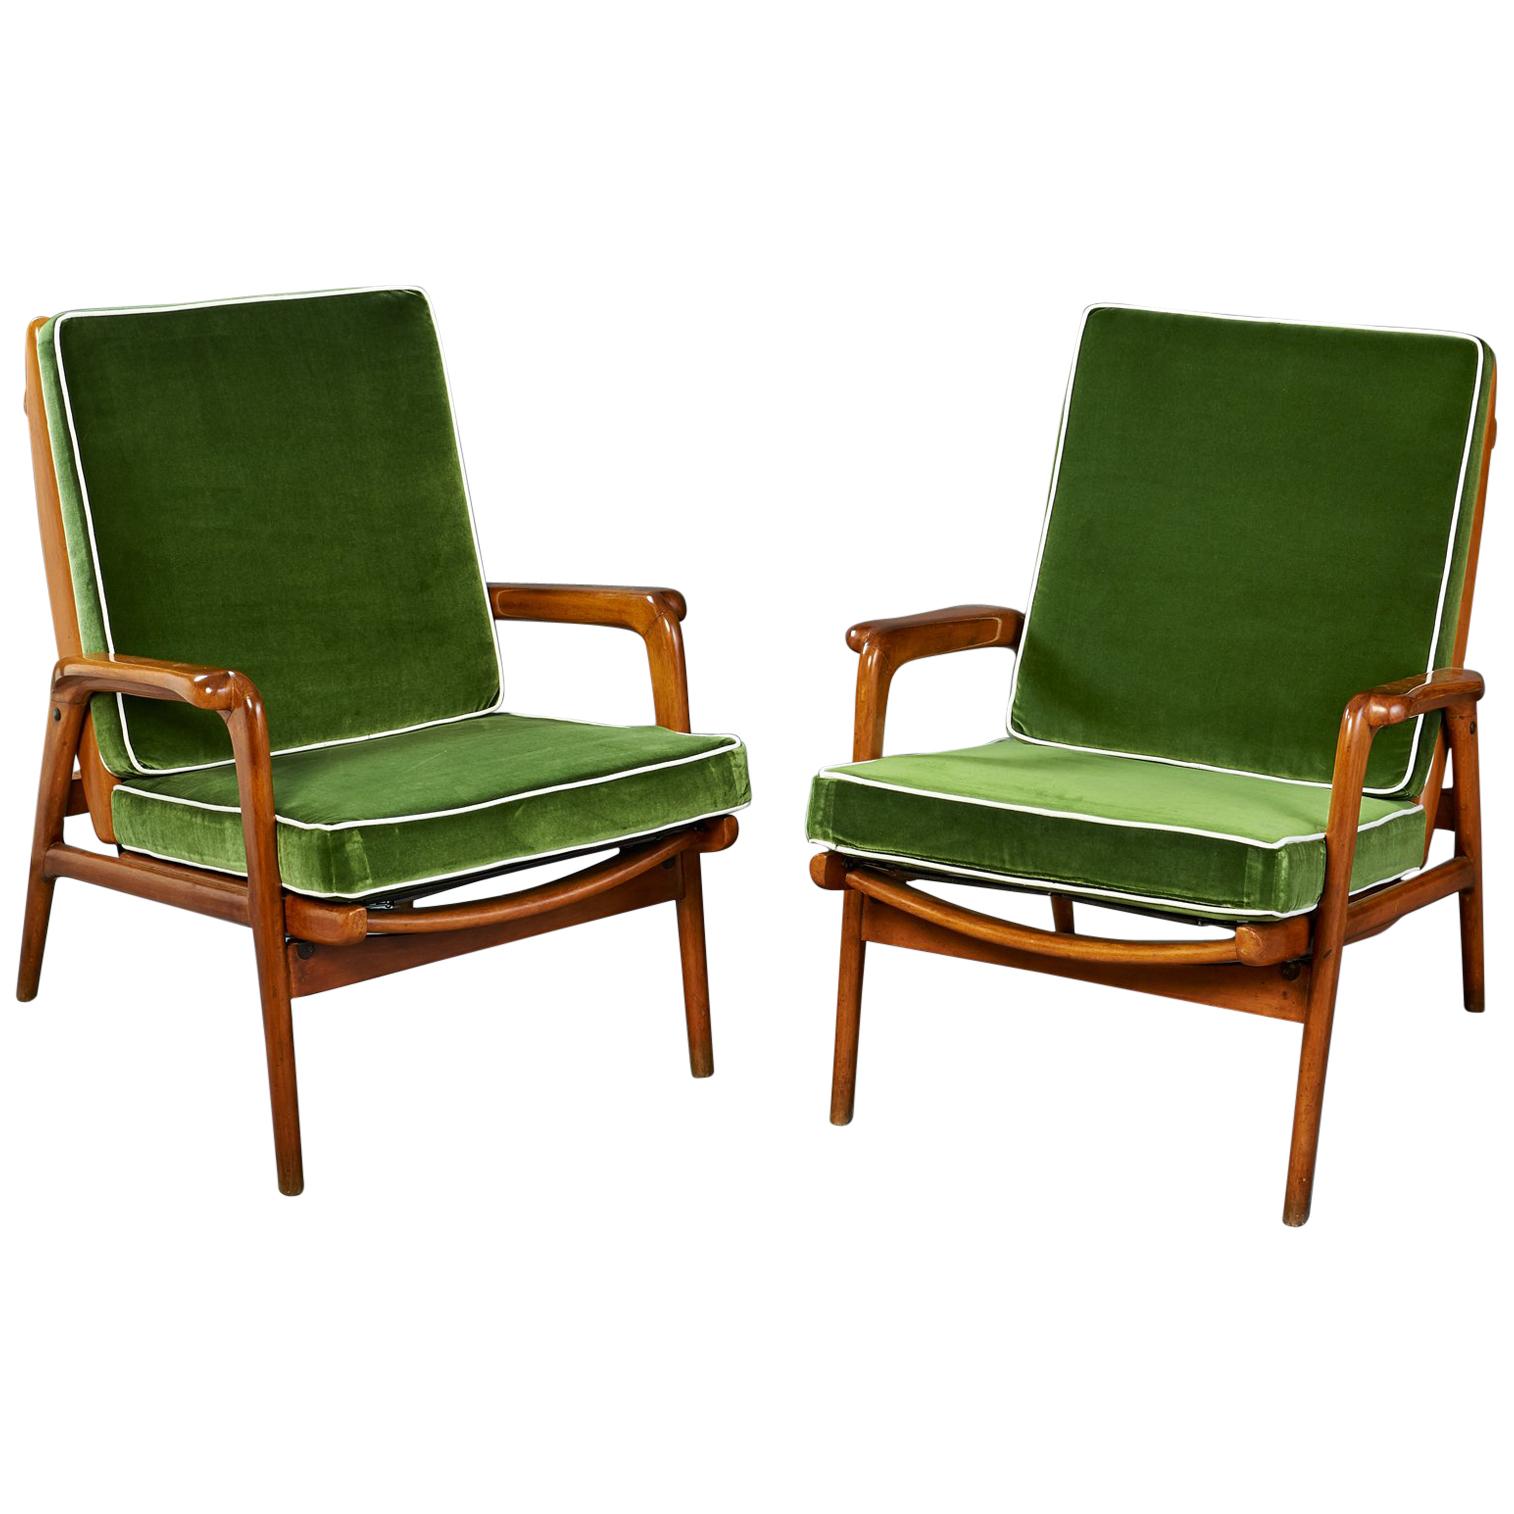 Pair of Reclining Wood Armchairs, Italy, 1950s